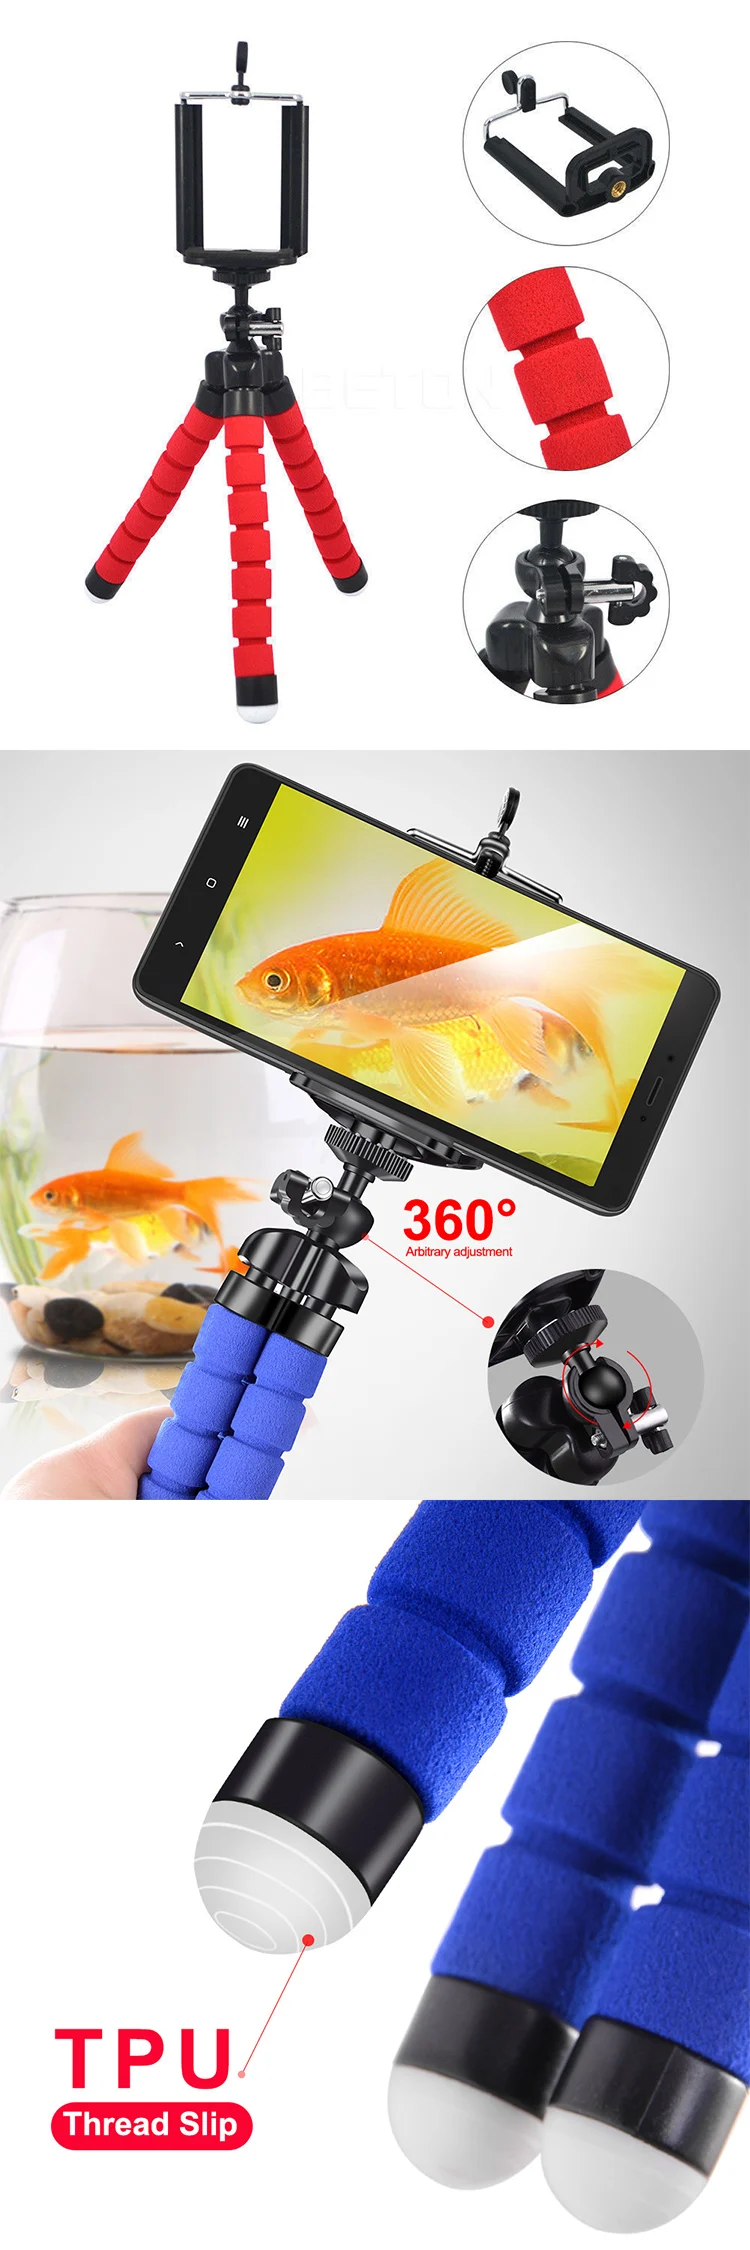 Flexible Octopus Tripod Mini Universal Mobile Cell Phone Digital Camera Holder Supports 55-85mm Body-wide Smart Phones 360degree